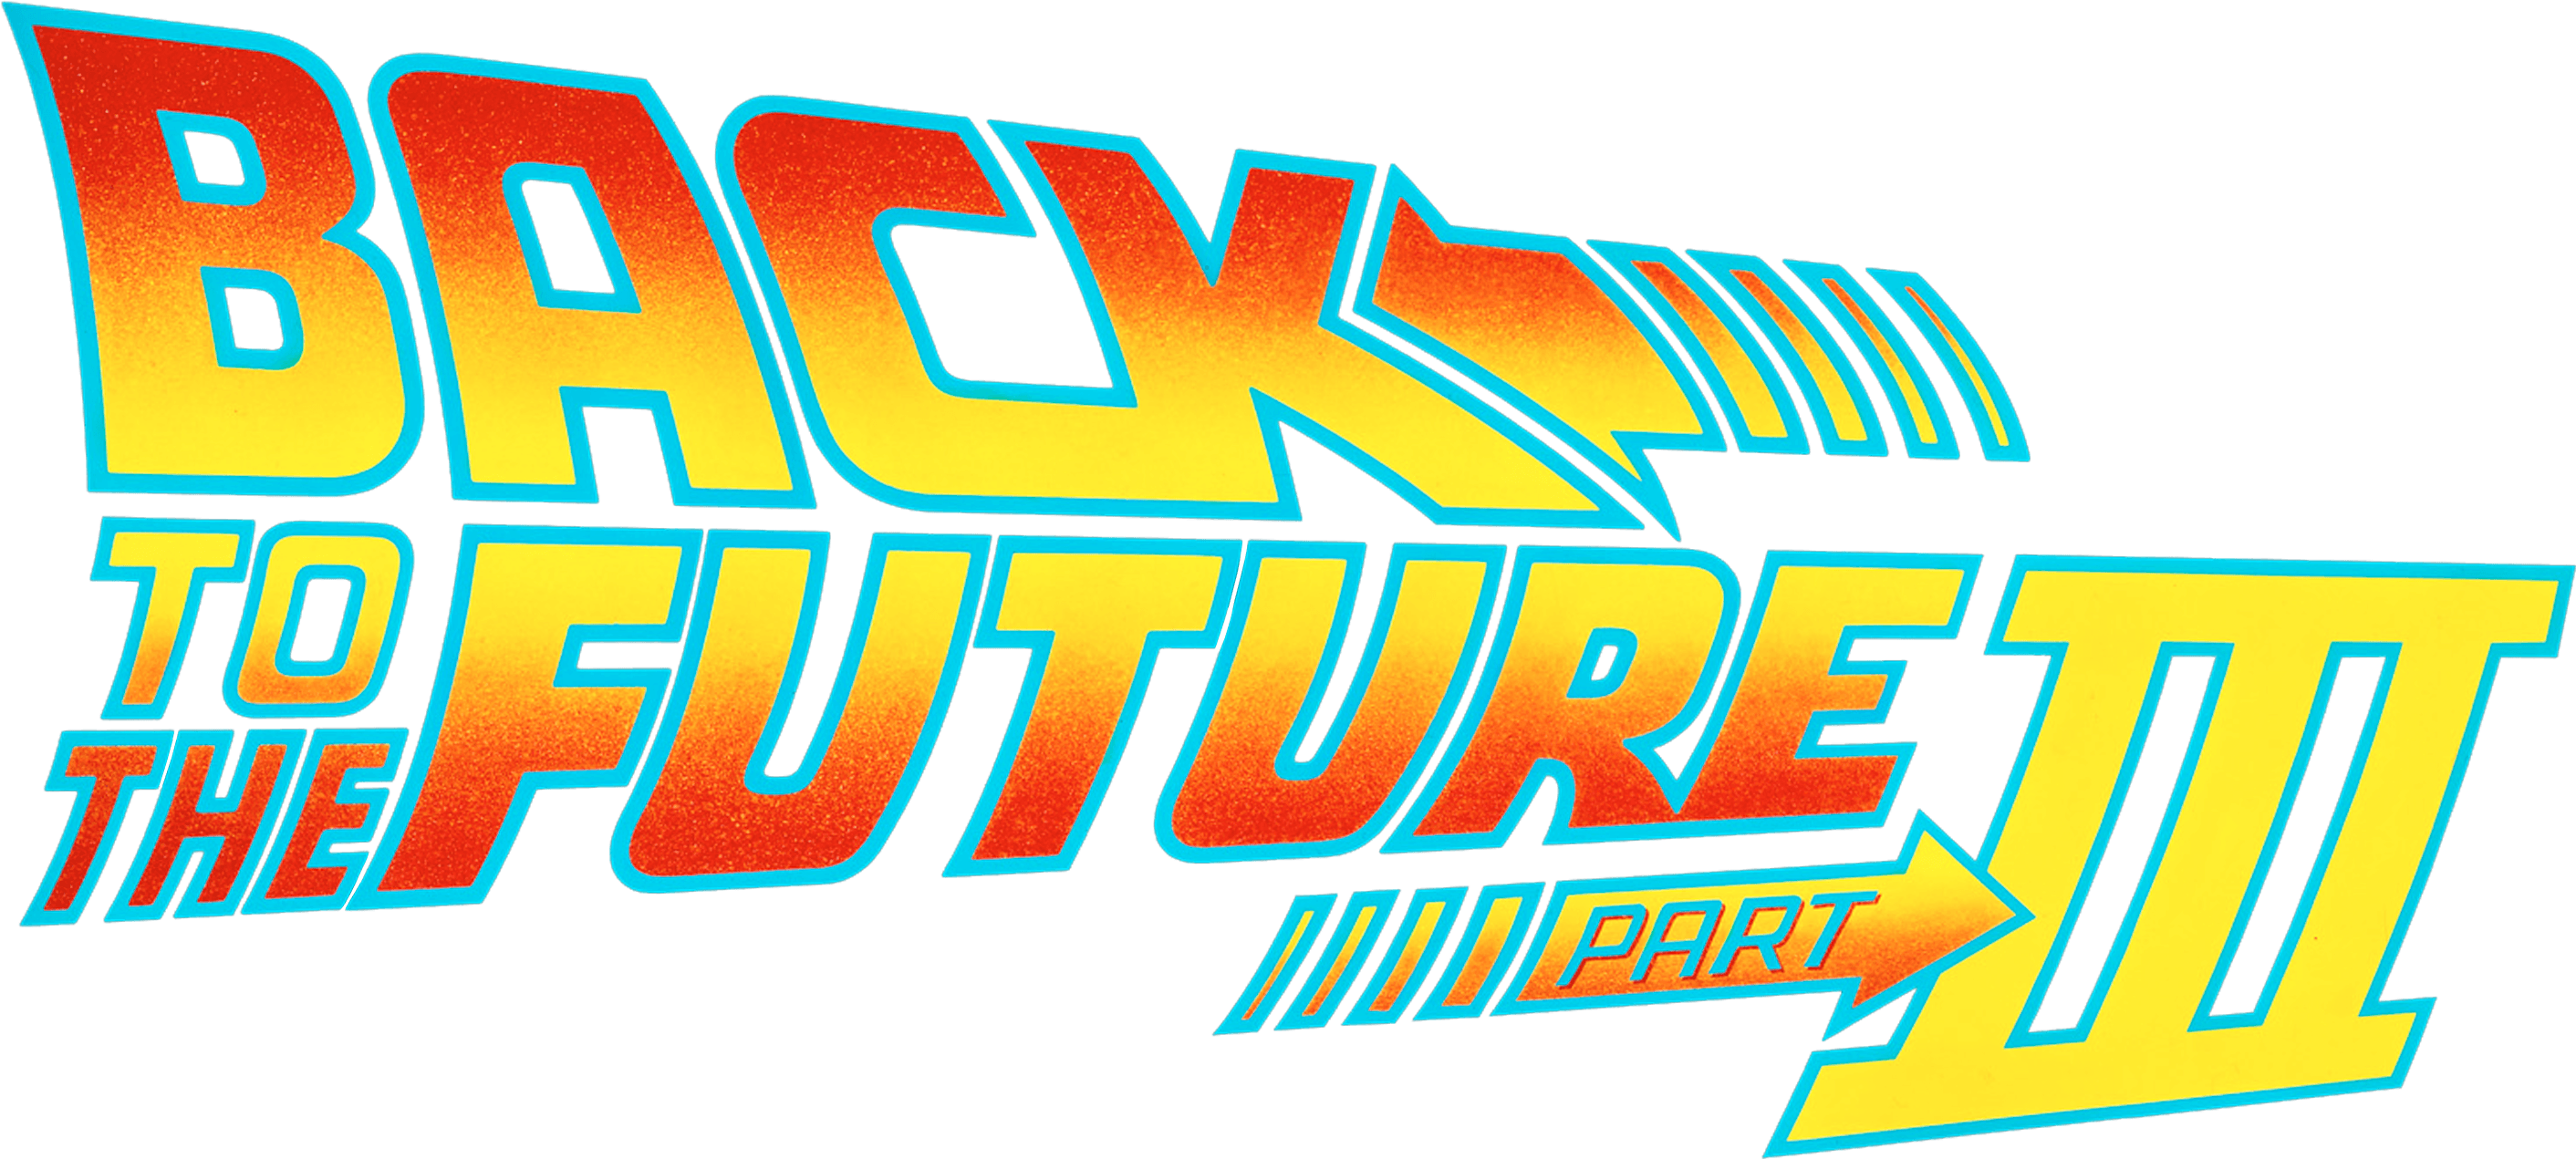 Back to the Future Part III logo